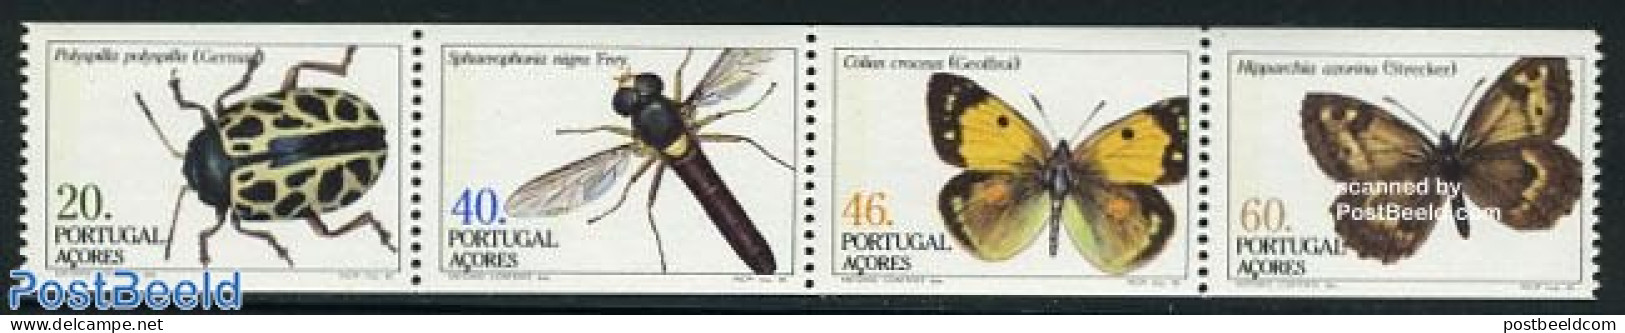 Azores 1985 Insects From Booklet 4v, Mint NH, Nature - Butterflies - Insects - Azoren